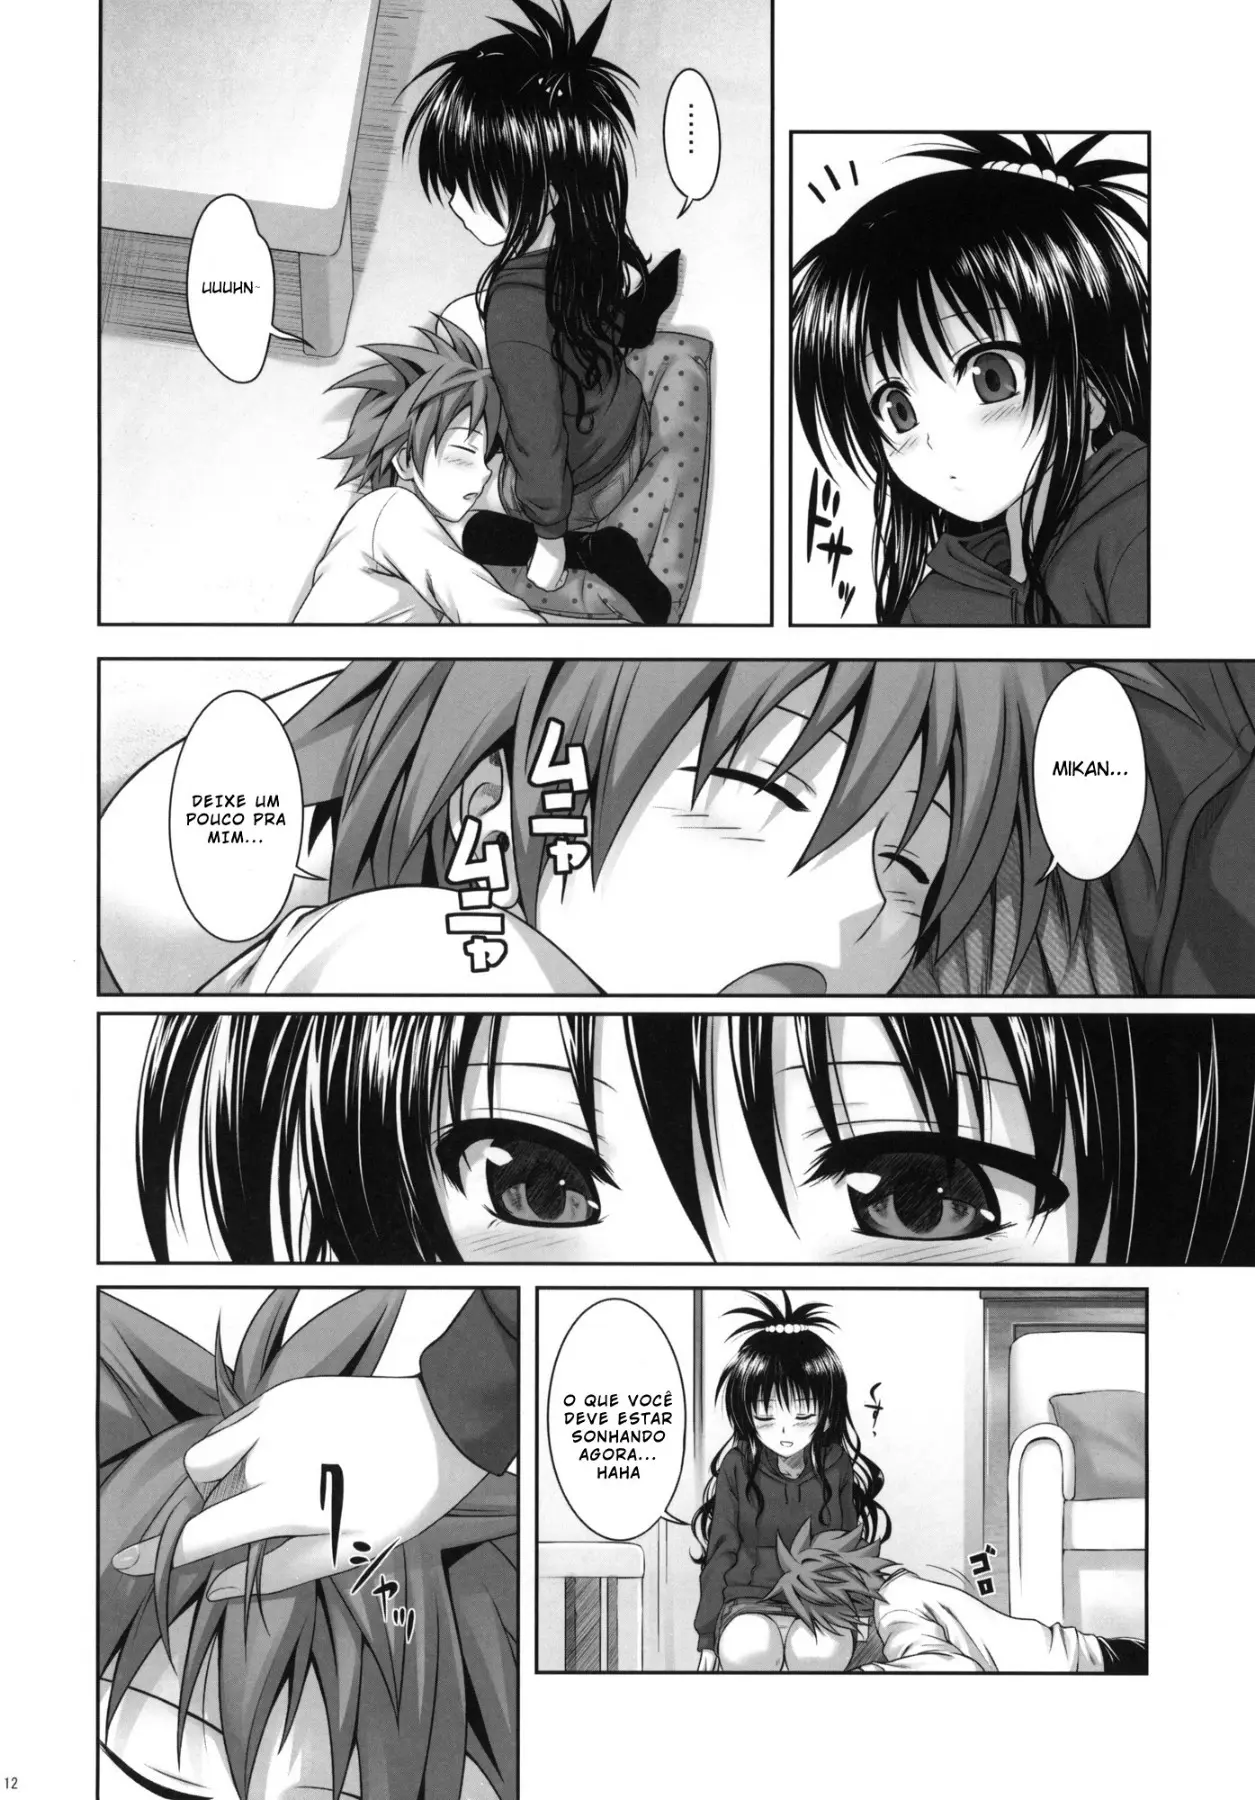 Mikan's Delusion, And Usual Days - Foto 11